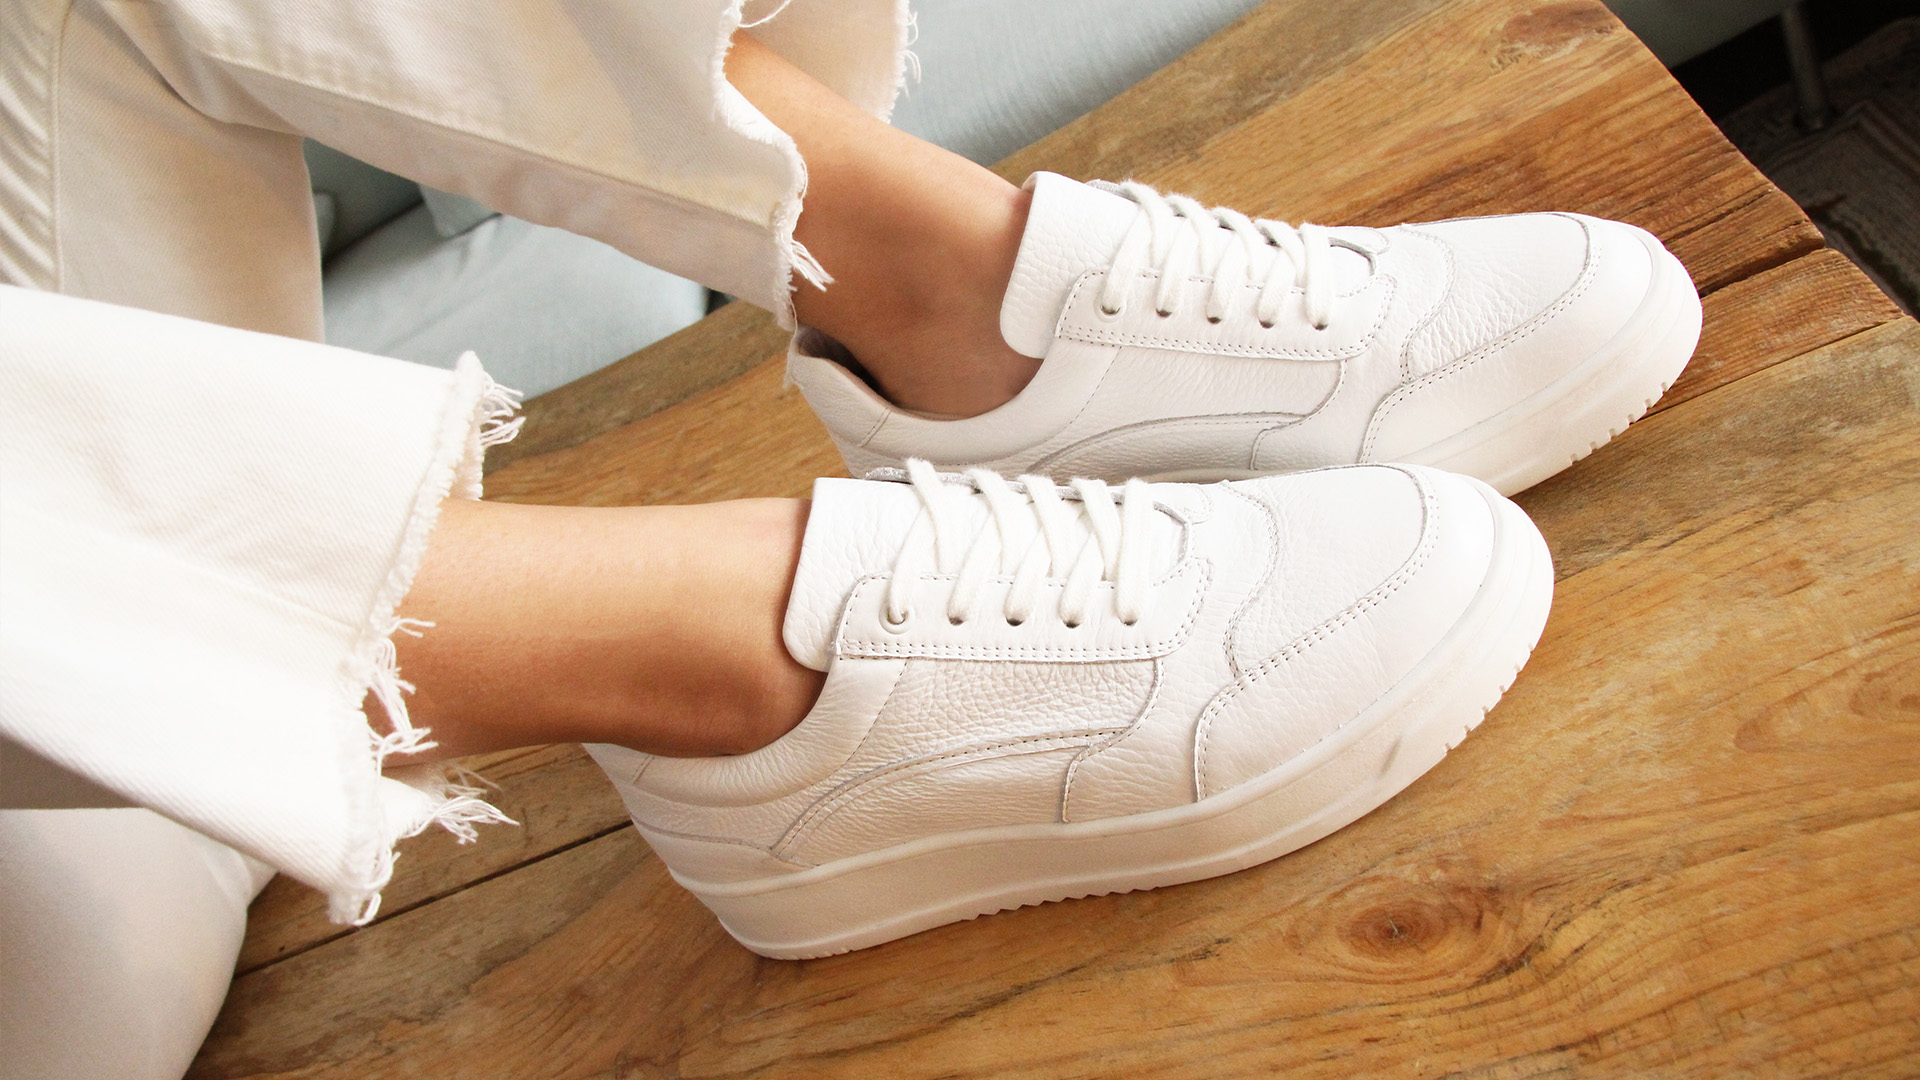 5 astuces pour nettoyer vos baskets blanches